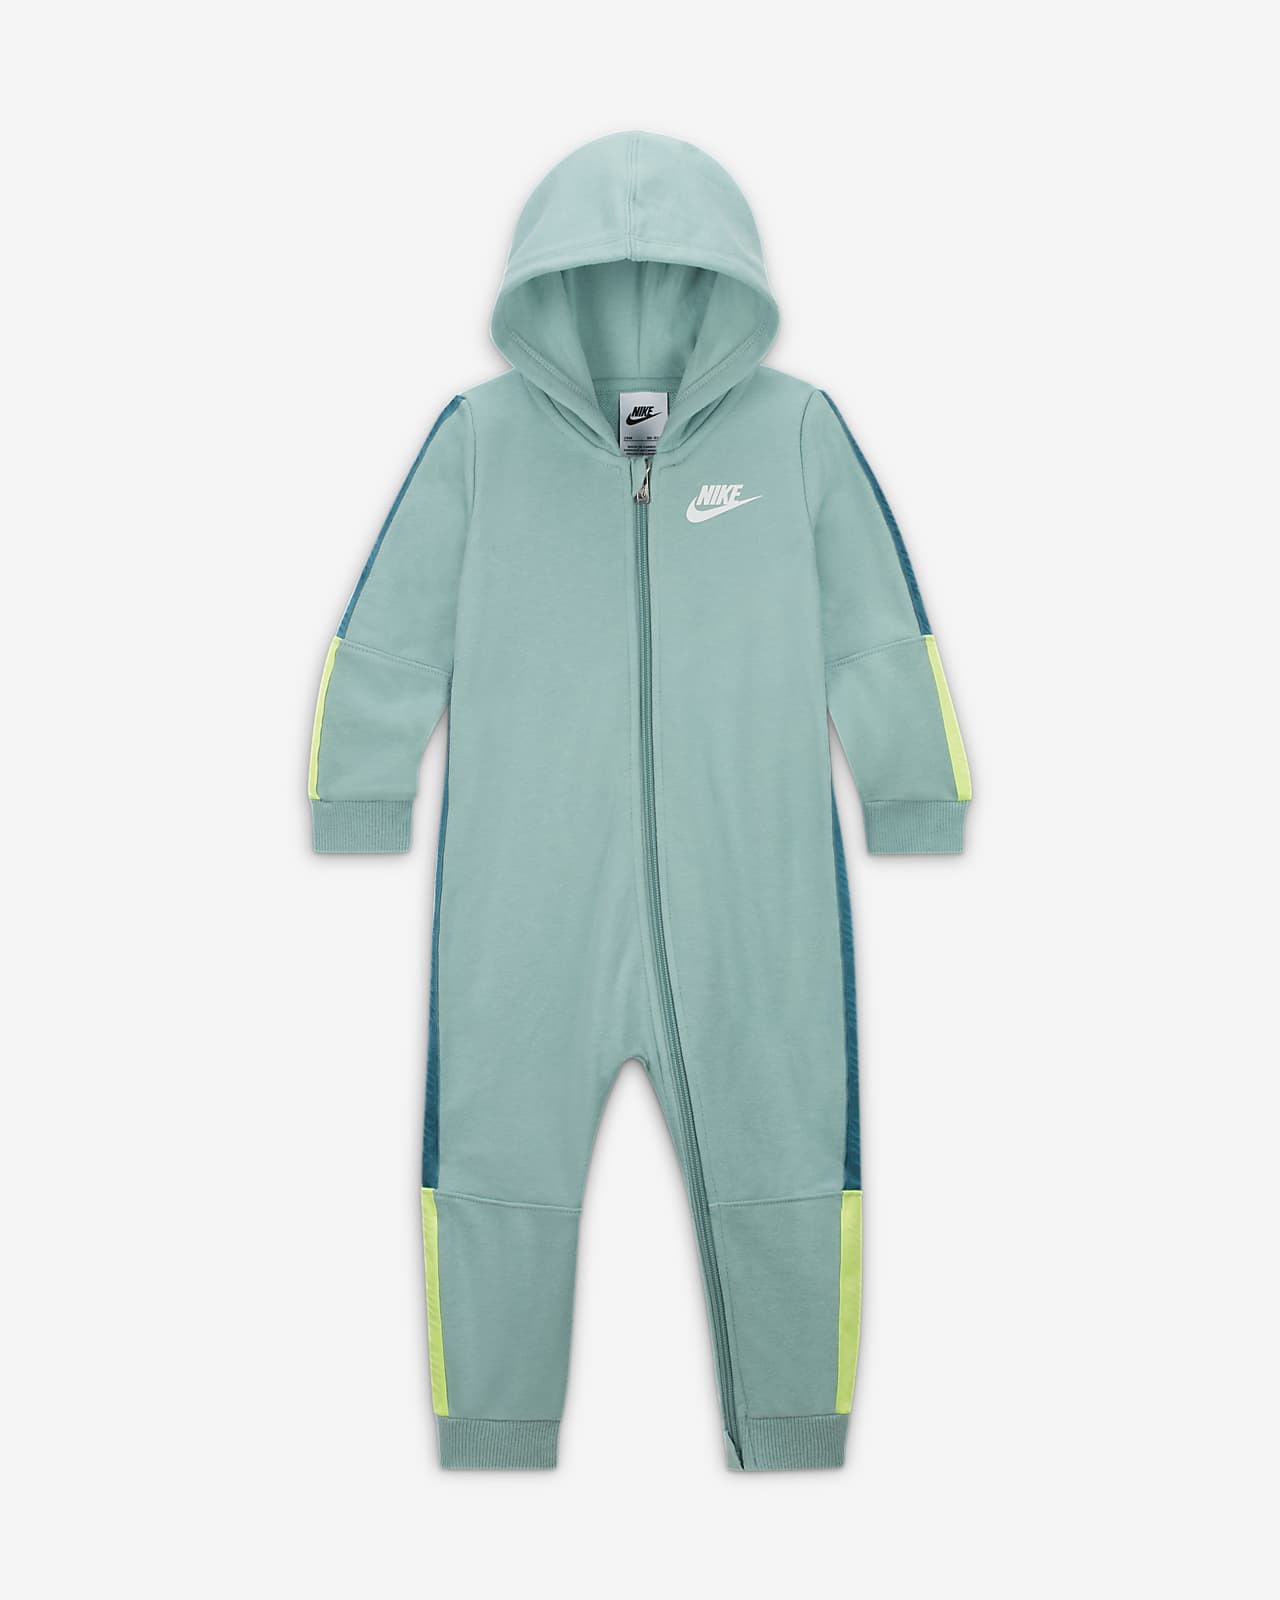 Nike Sportswear Taping Hooded Coverall Overall für Babys